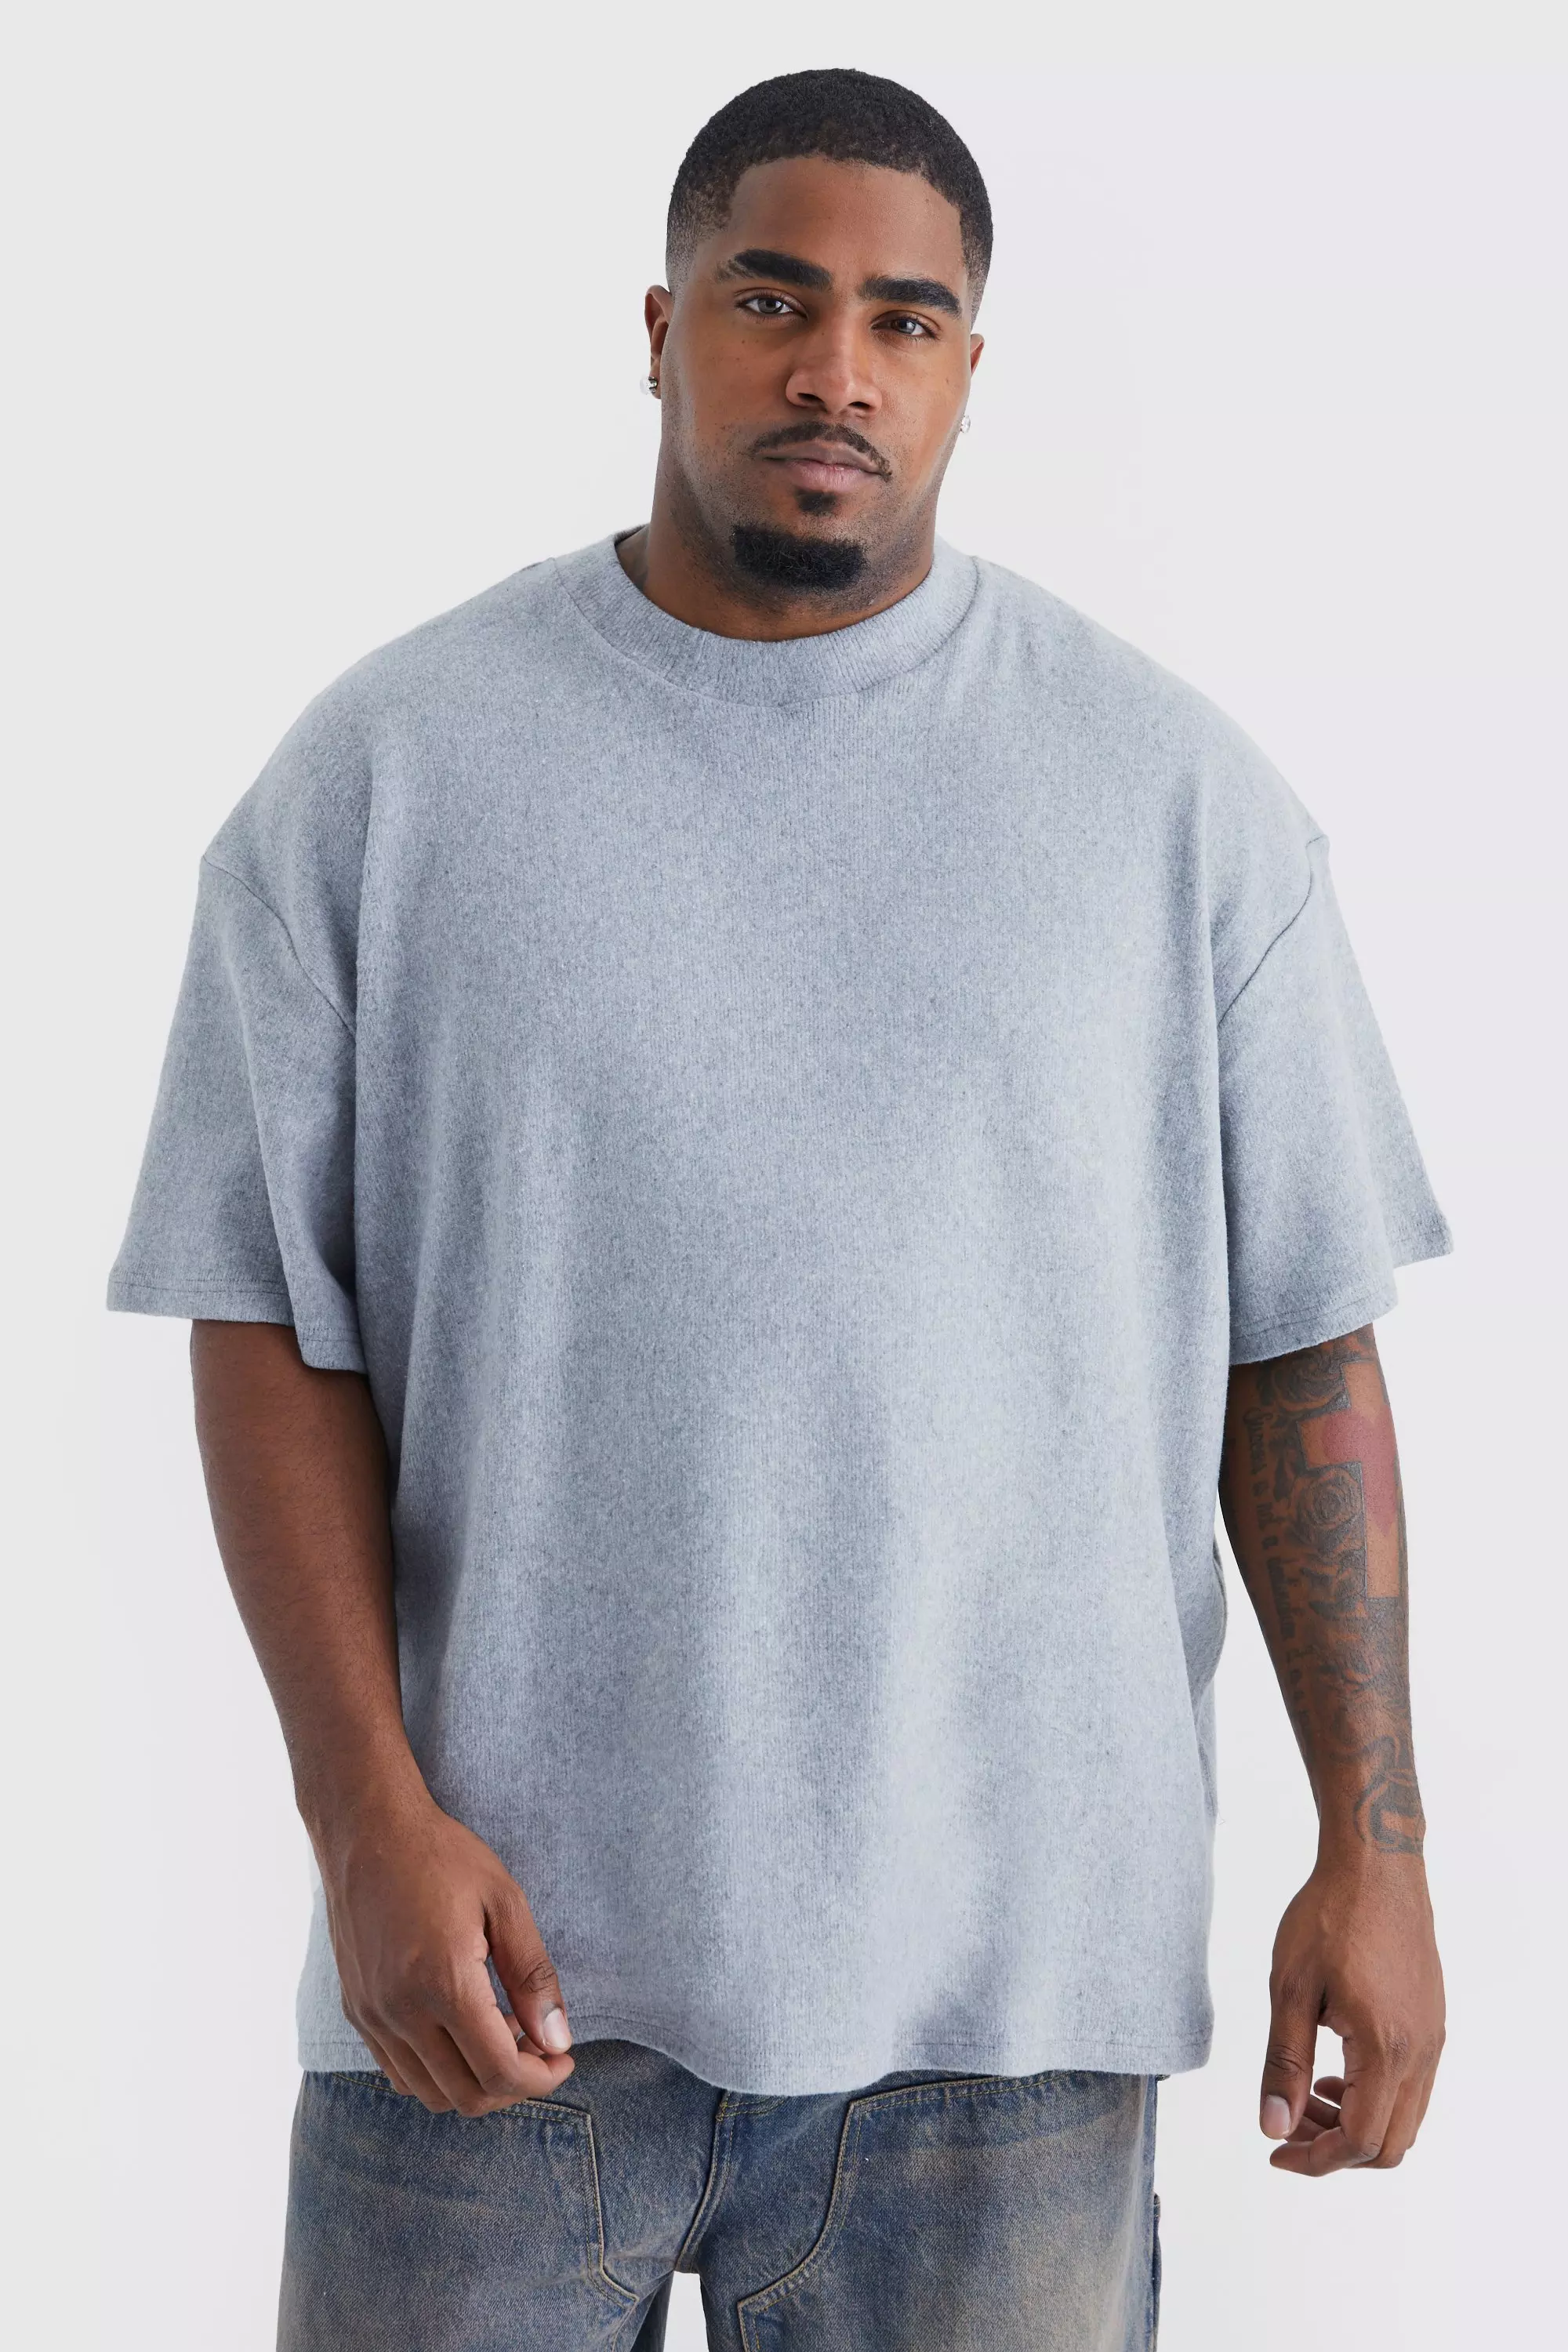 Plus Brushed Ottoman Oversized Extended Neck T-shirt Grey marl